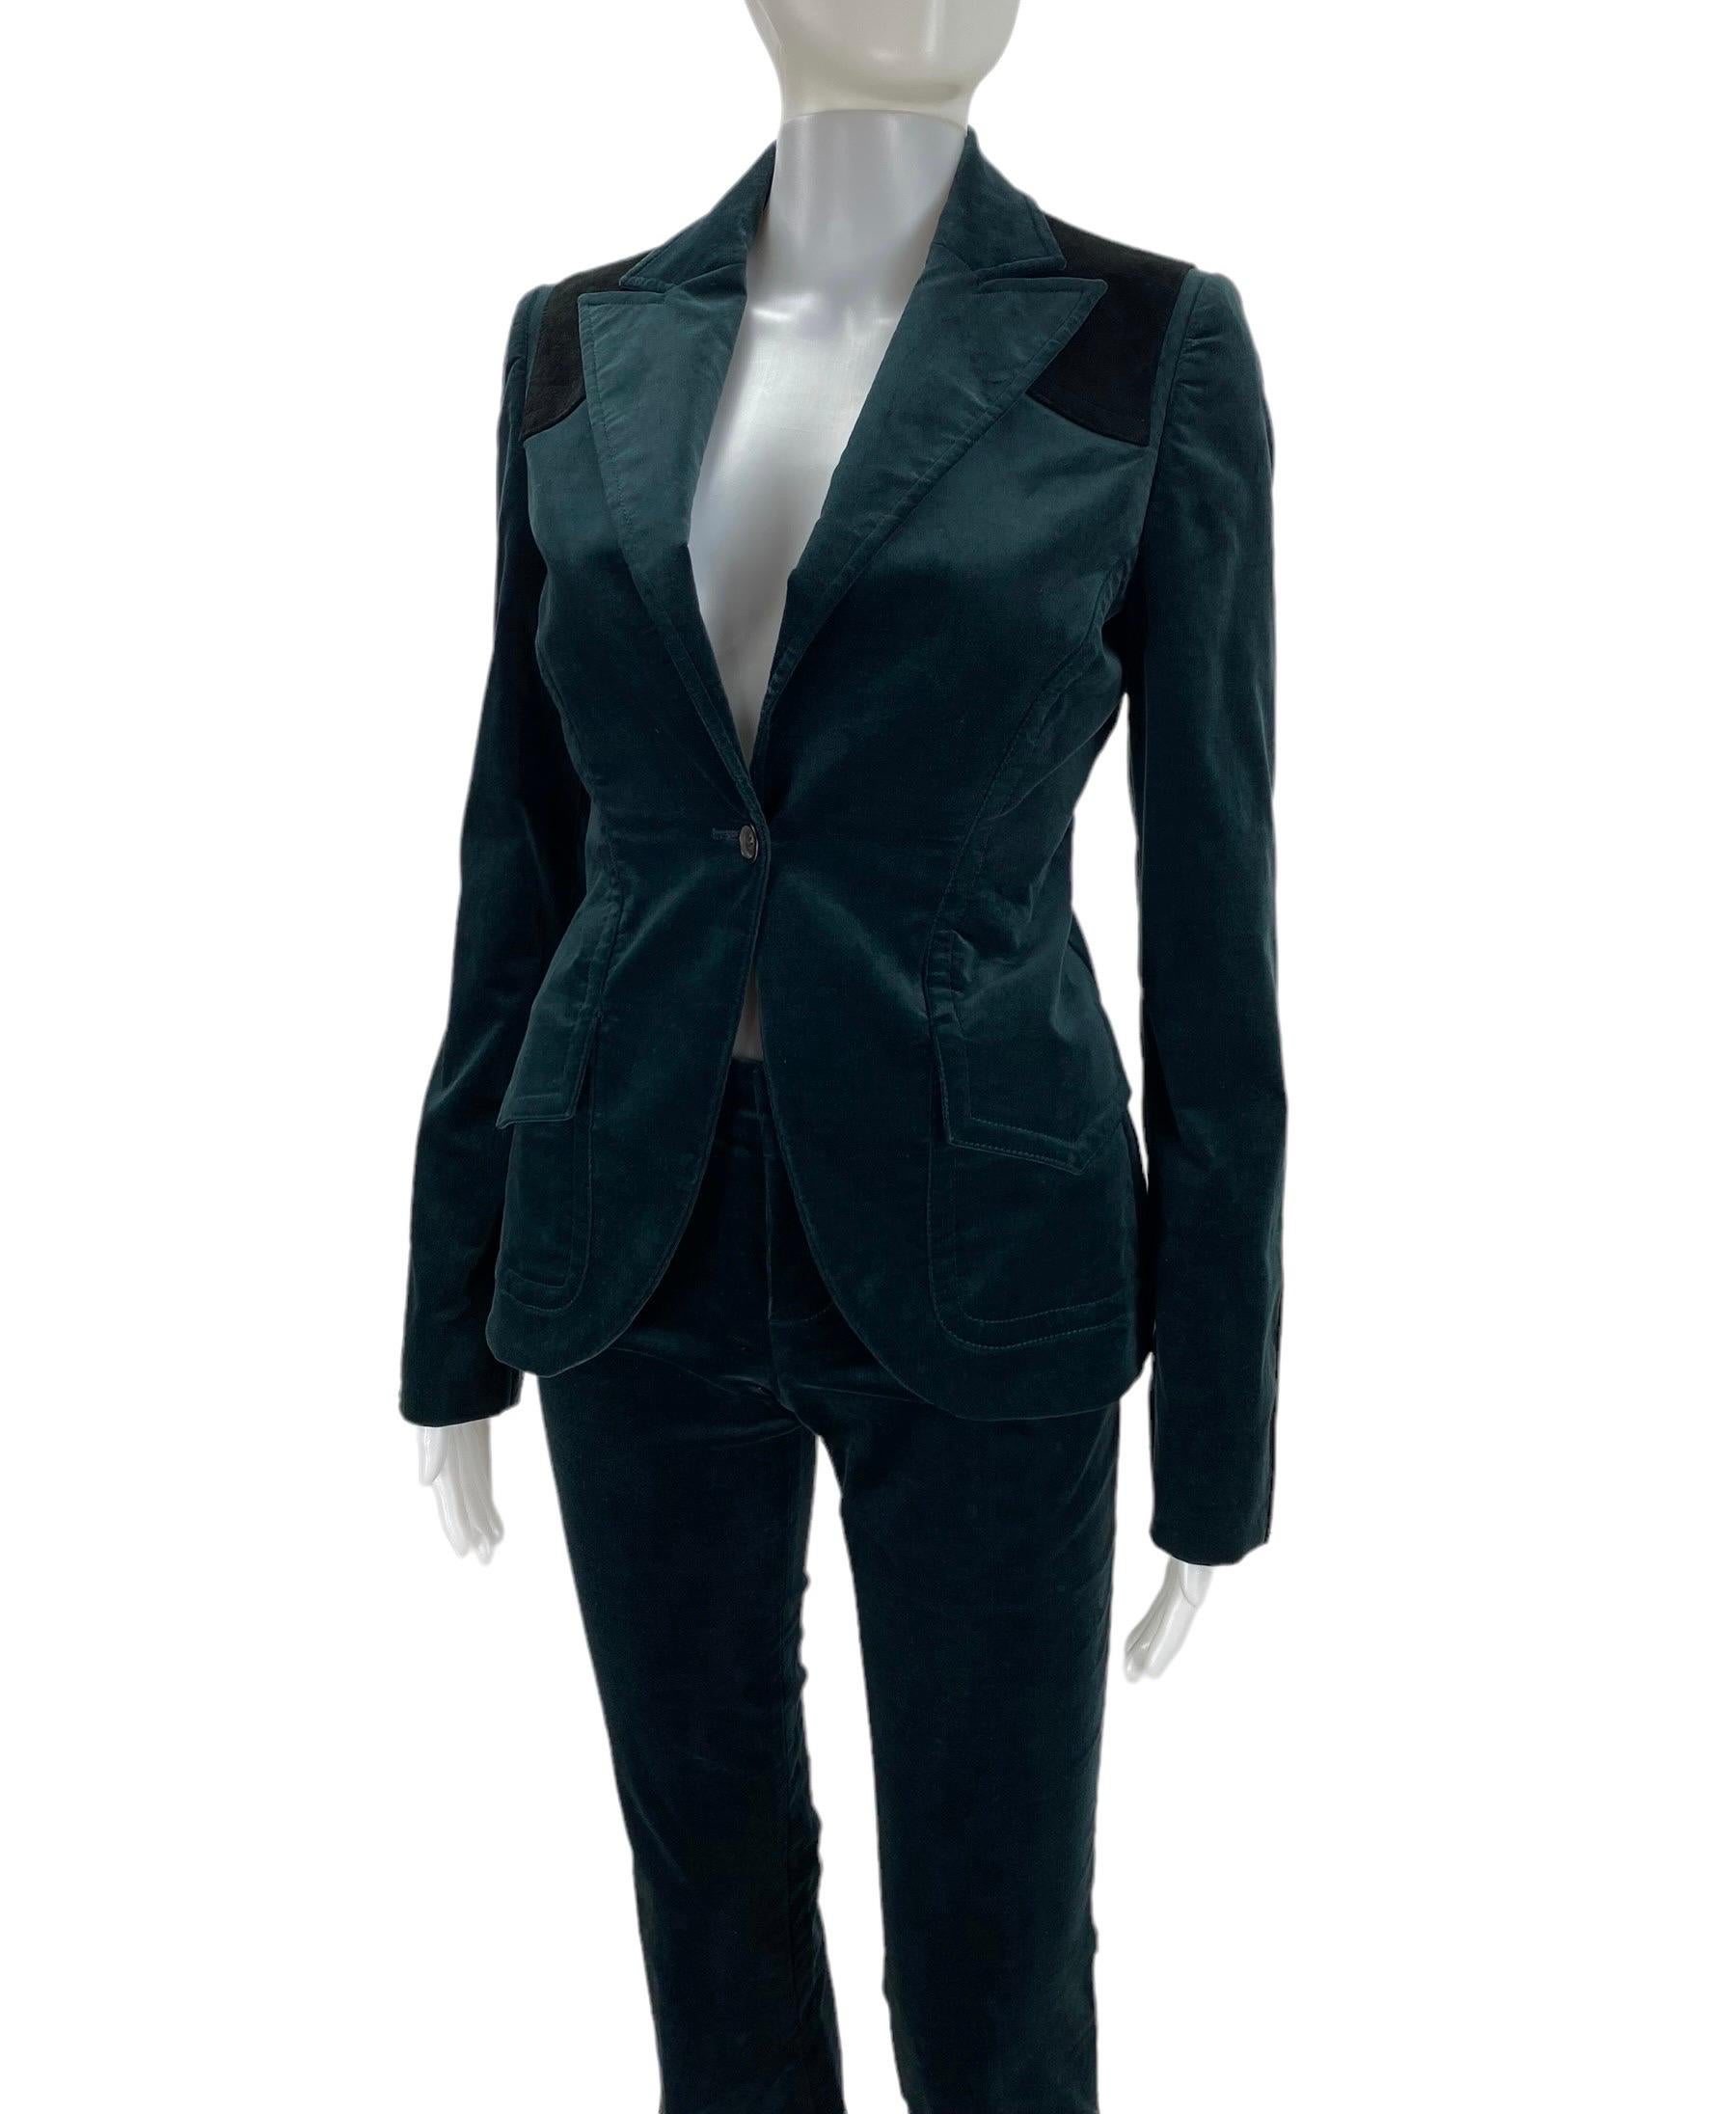 Vintage Gucci Dark Green Velvet Pant Suit 
2005 Collection
Italian size 38 - US 2
Buttons with Gucci signature, Black suede leather detail on shoulders and sleeves, G logo embroidery on pant's back pocket, Lined.
Pants: waist - 28 inches, rise - 8